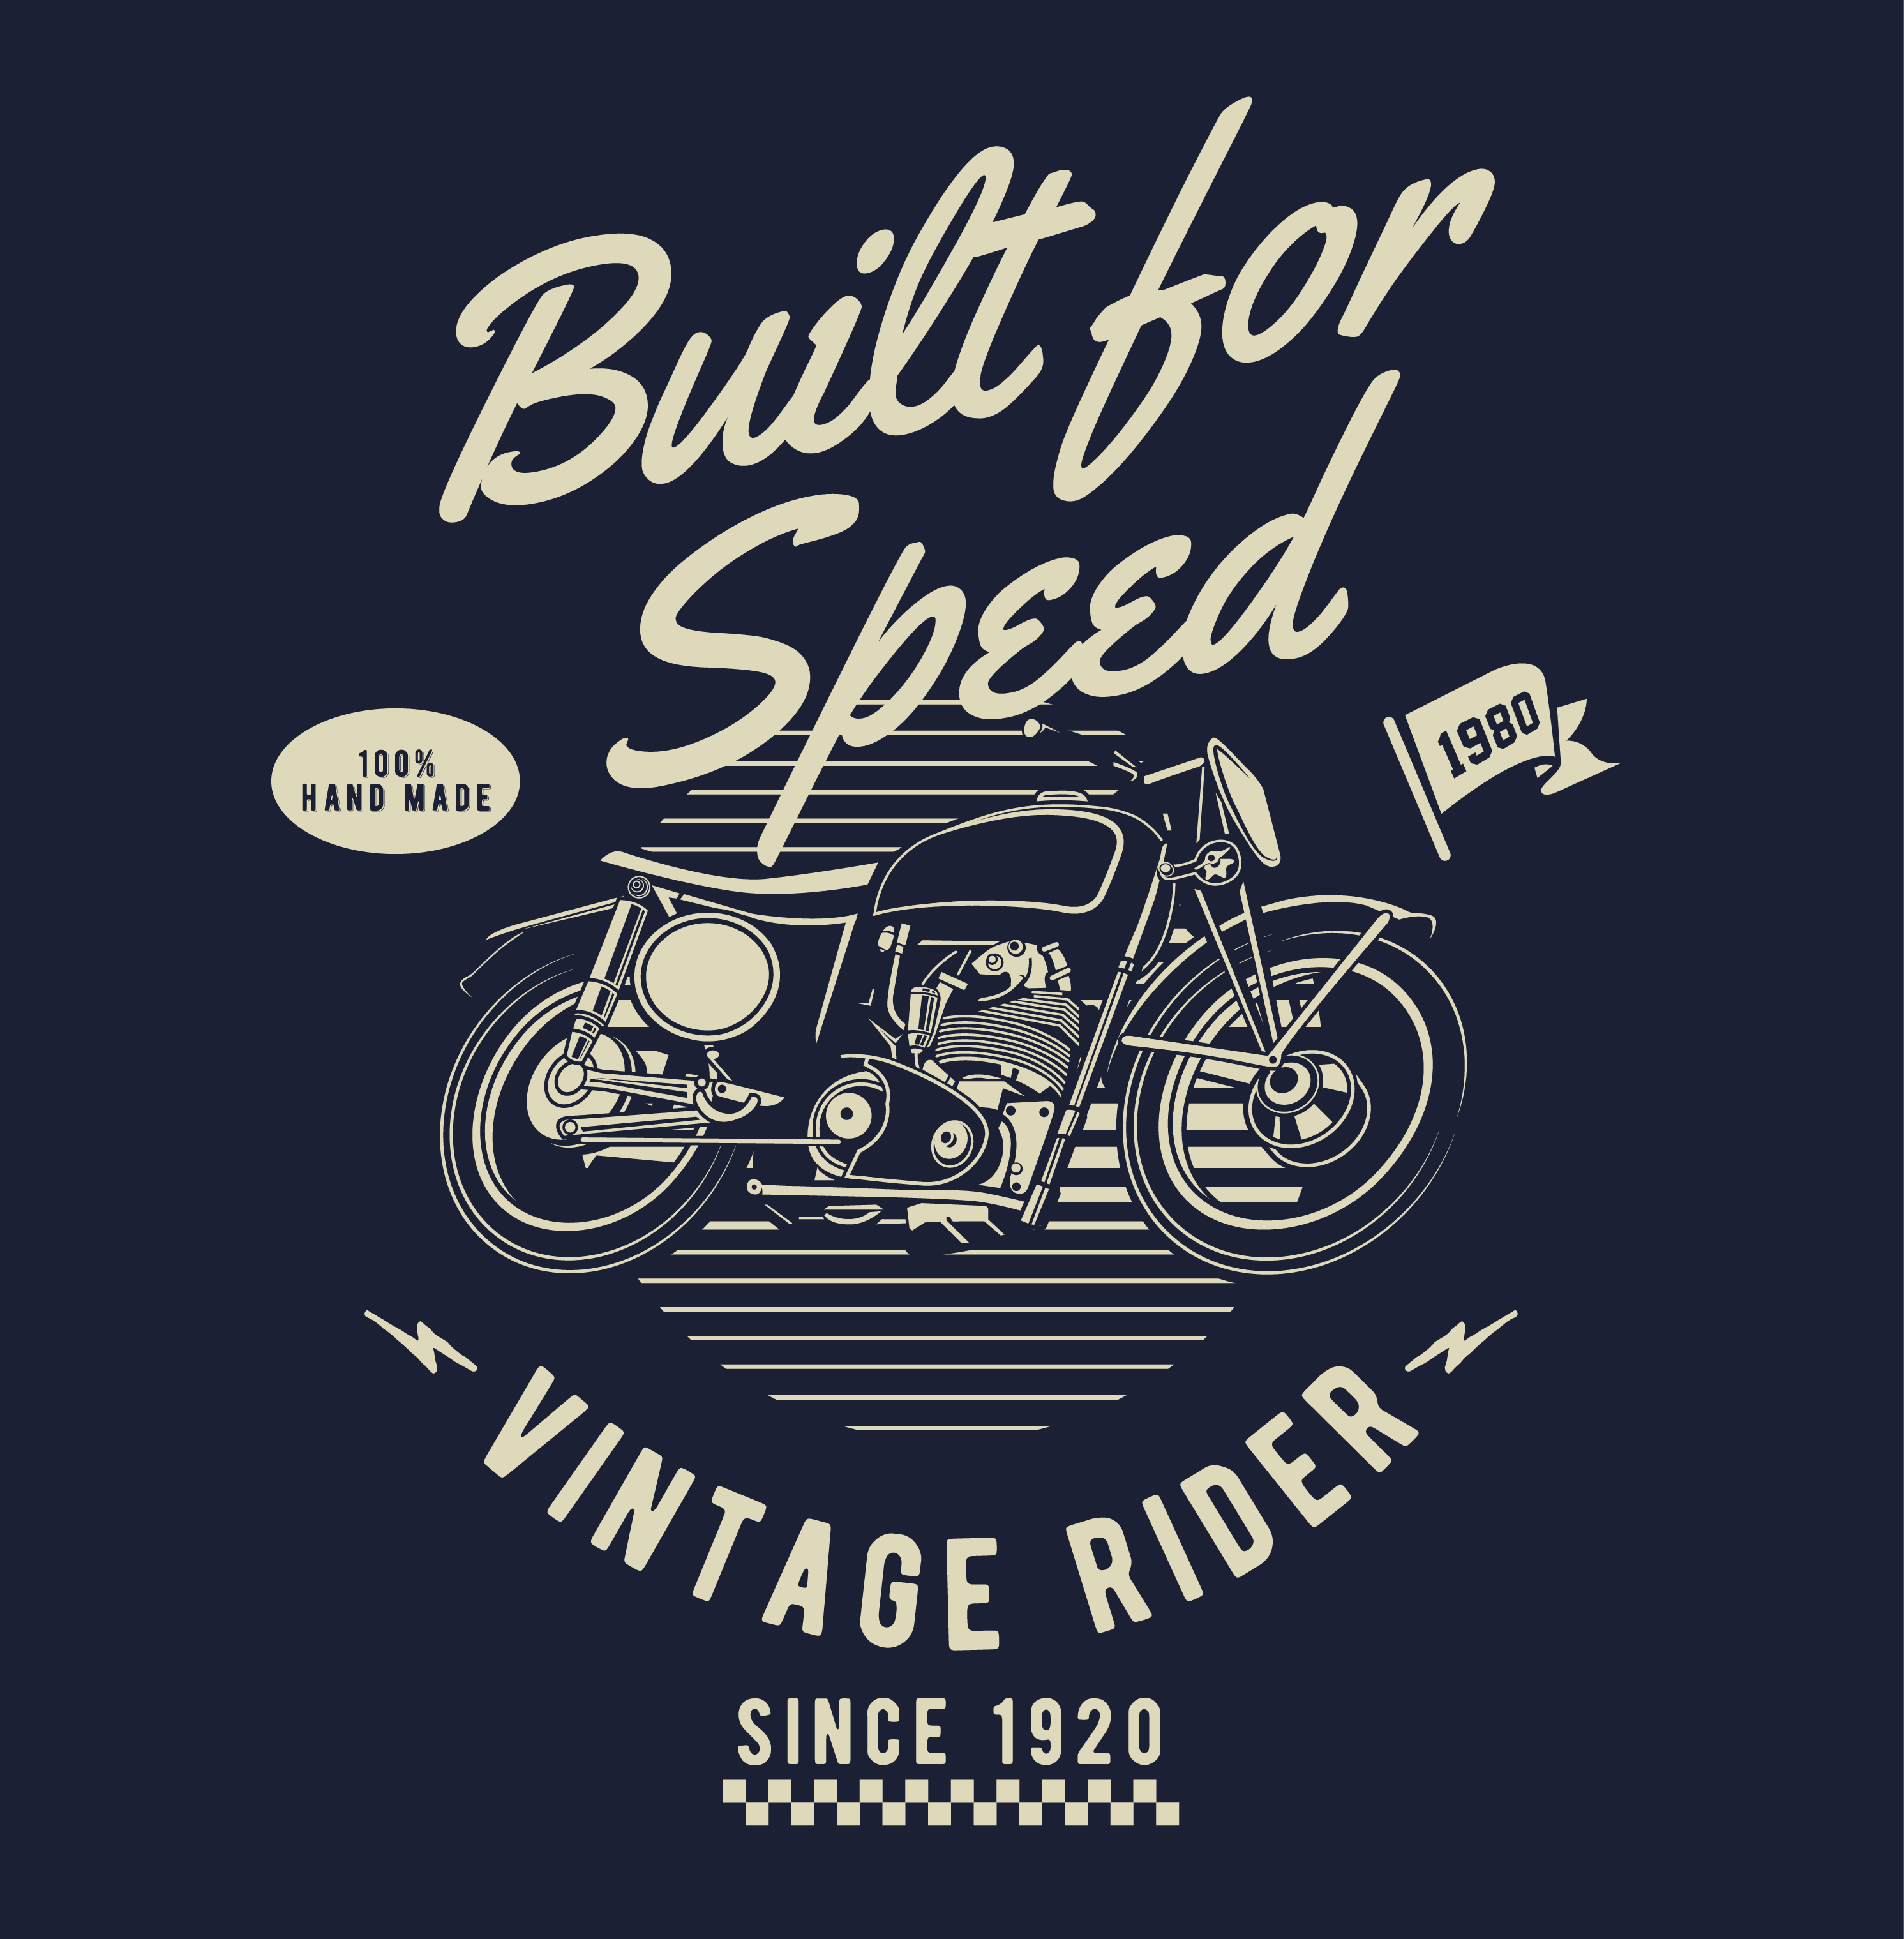 Vintage motorcycle design with Built for Speed  text 